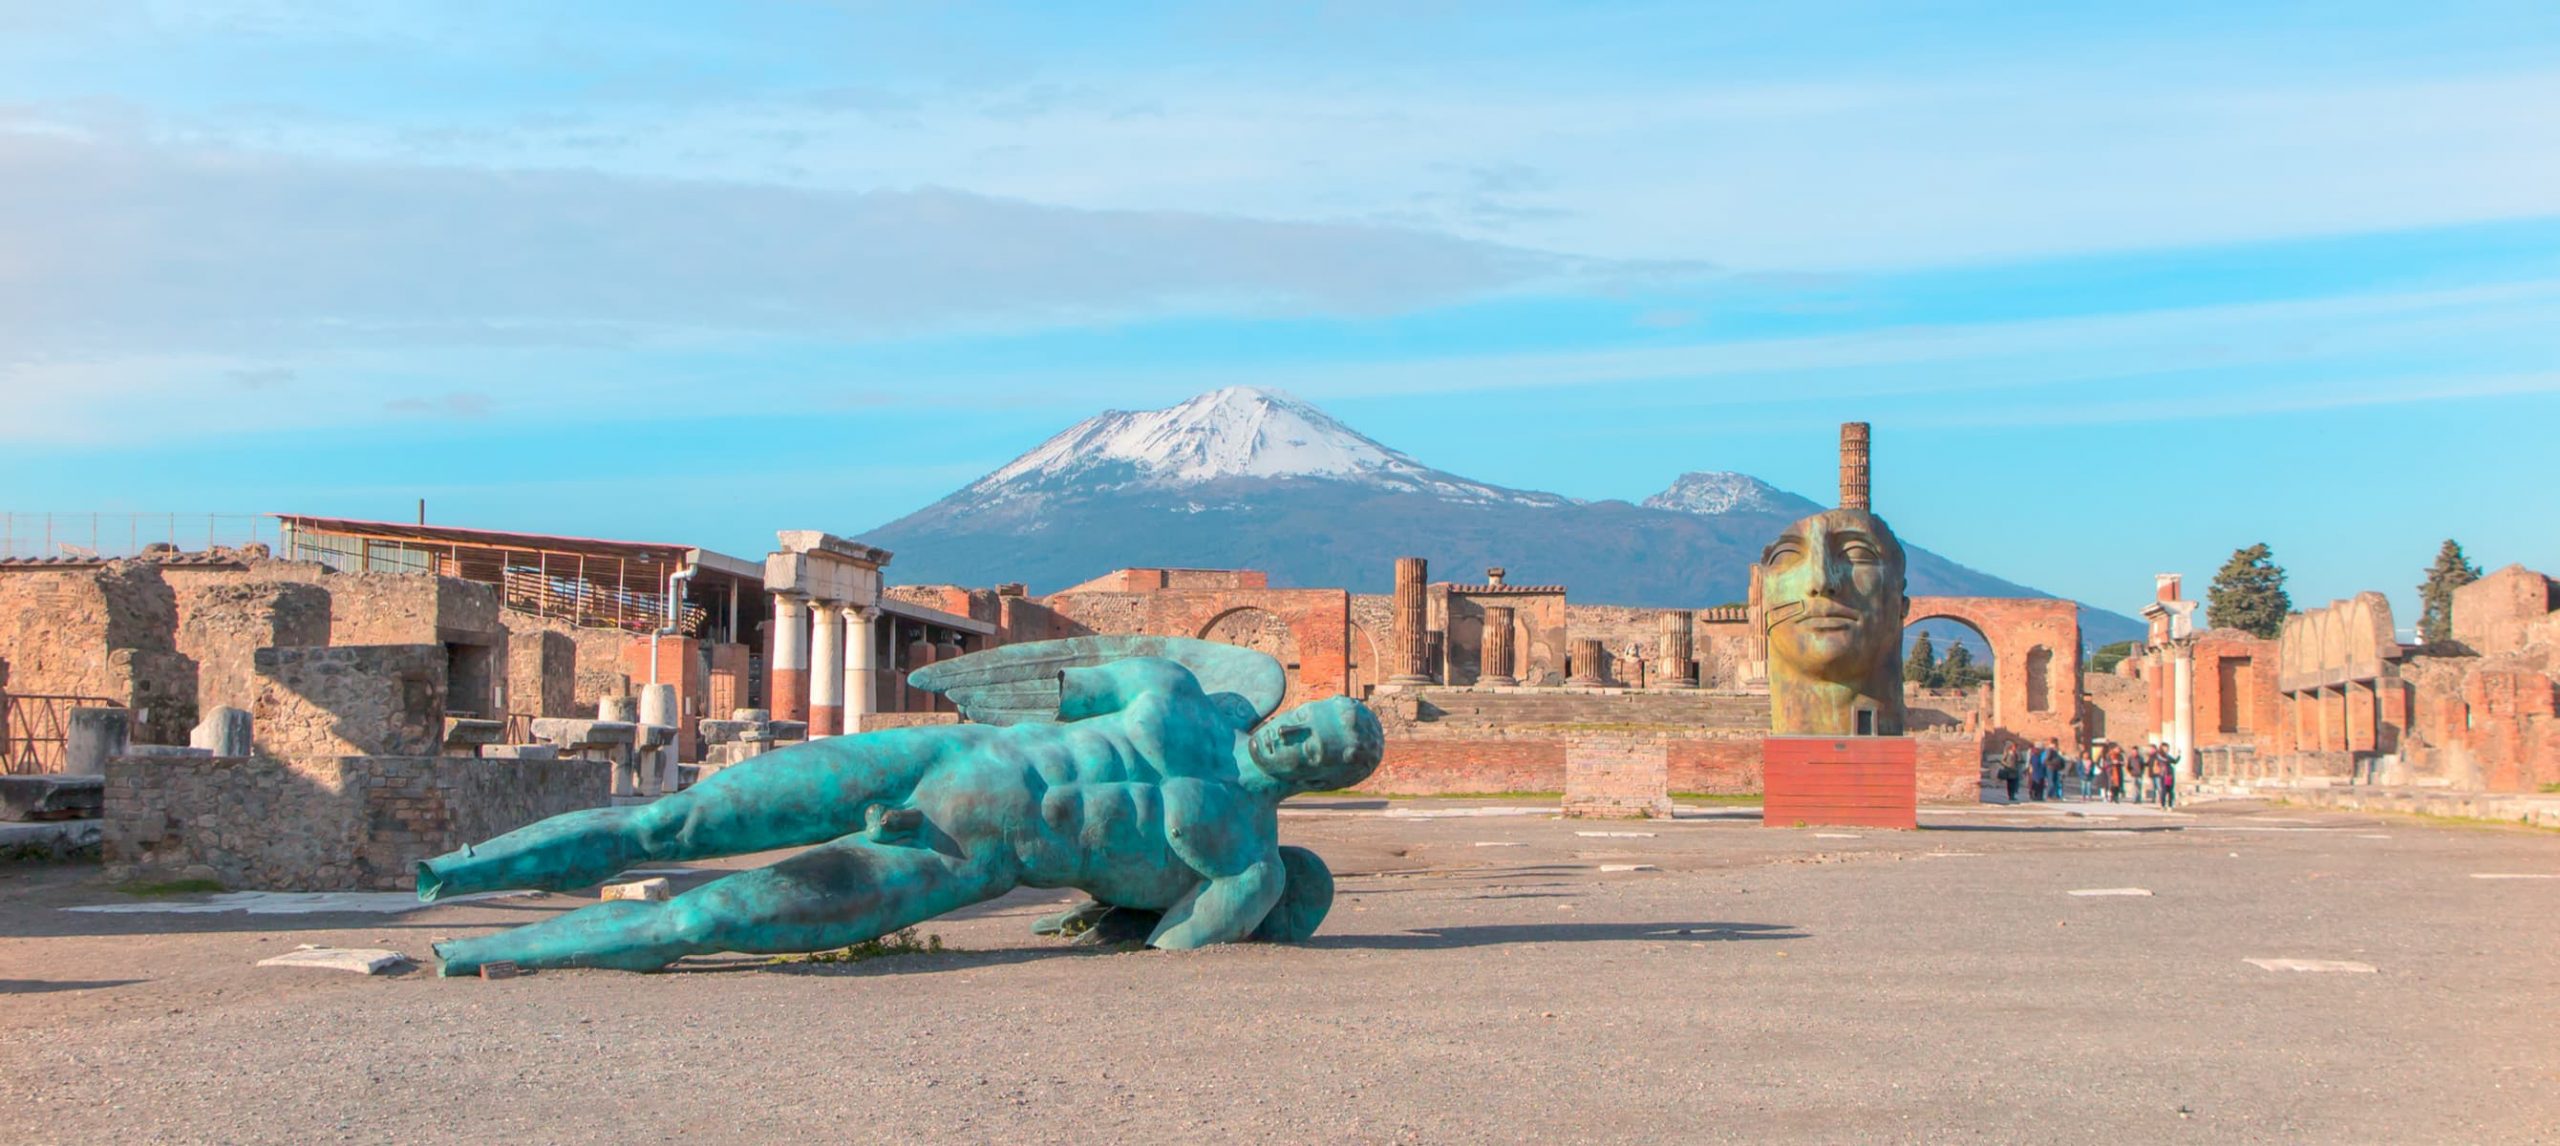 How to Get From Rome to Pompeii: The 4 Best Ways